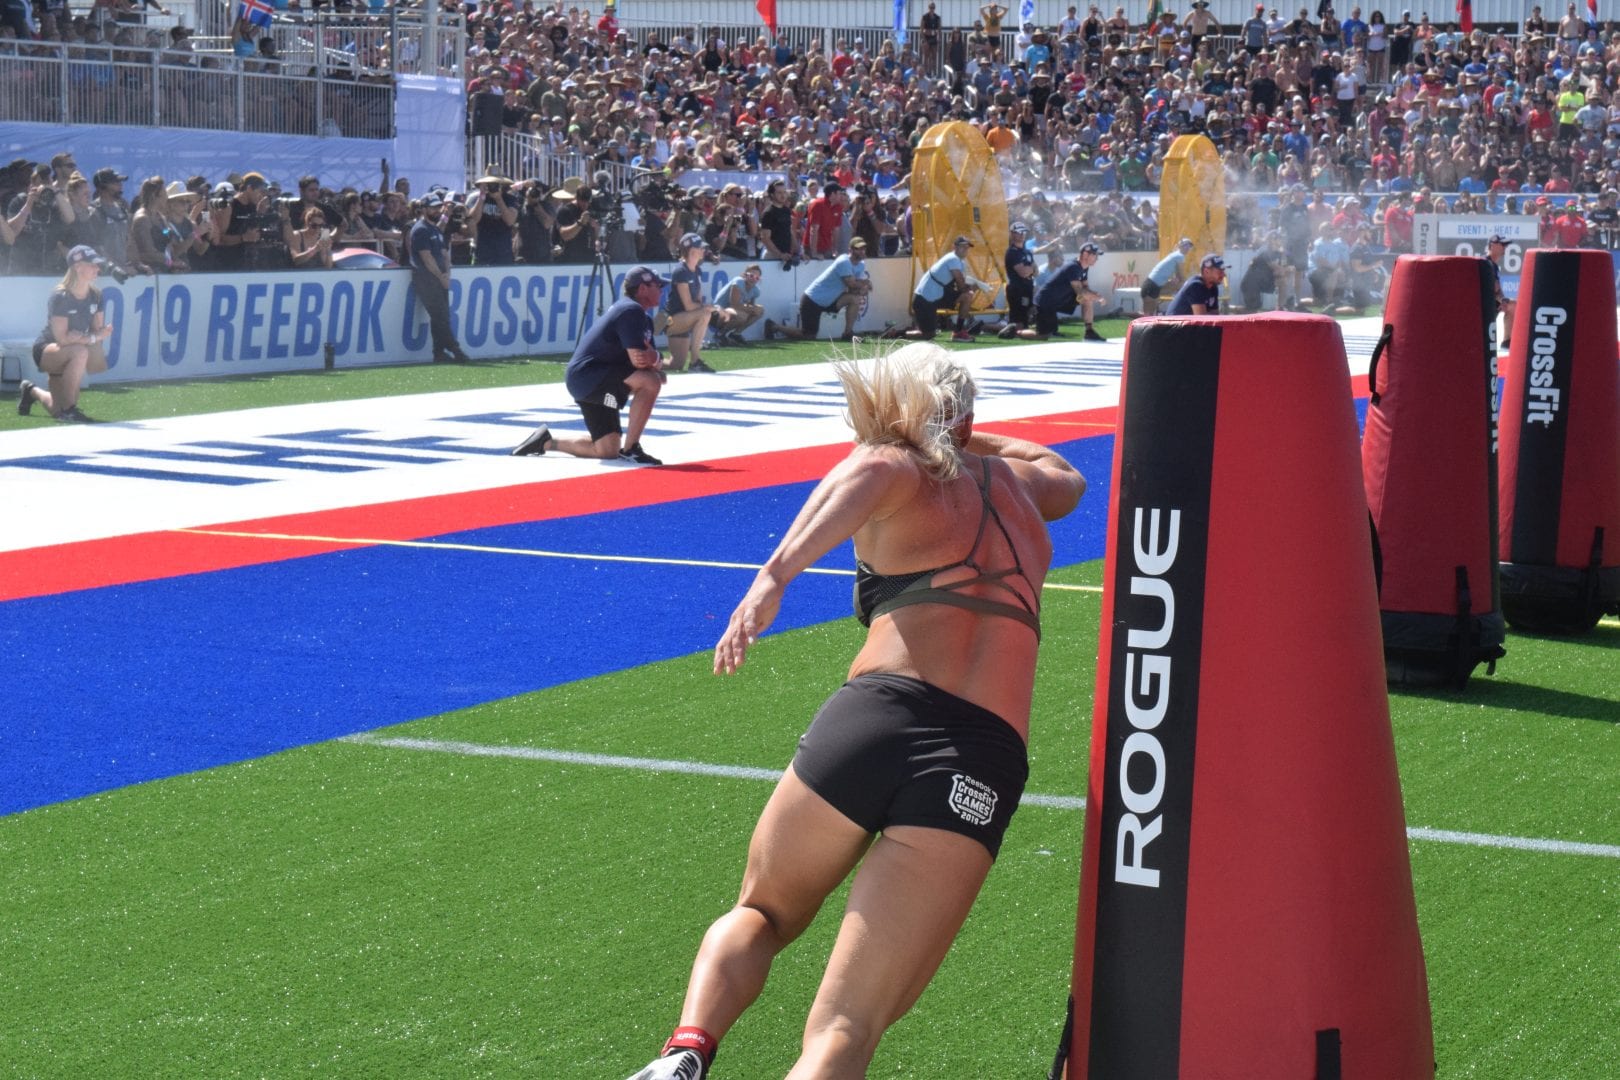 Sara Sigmundsdottir competes in the Sprint event at the 2019 CrossFit Games.